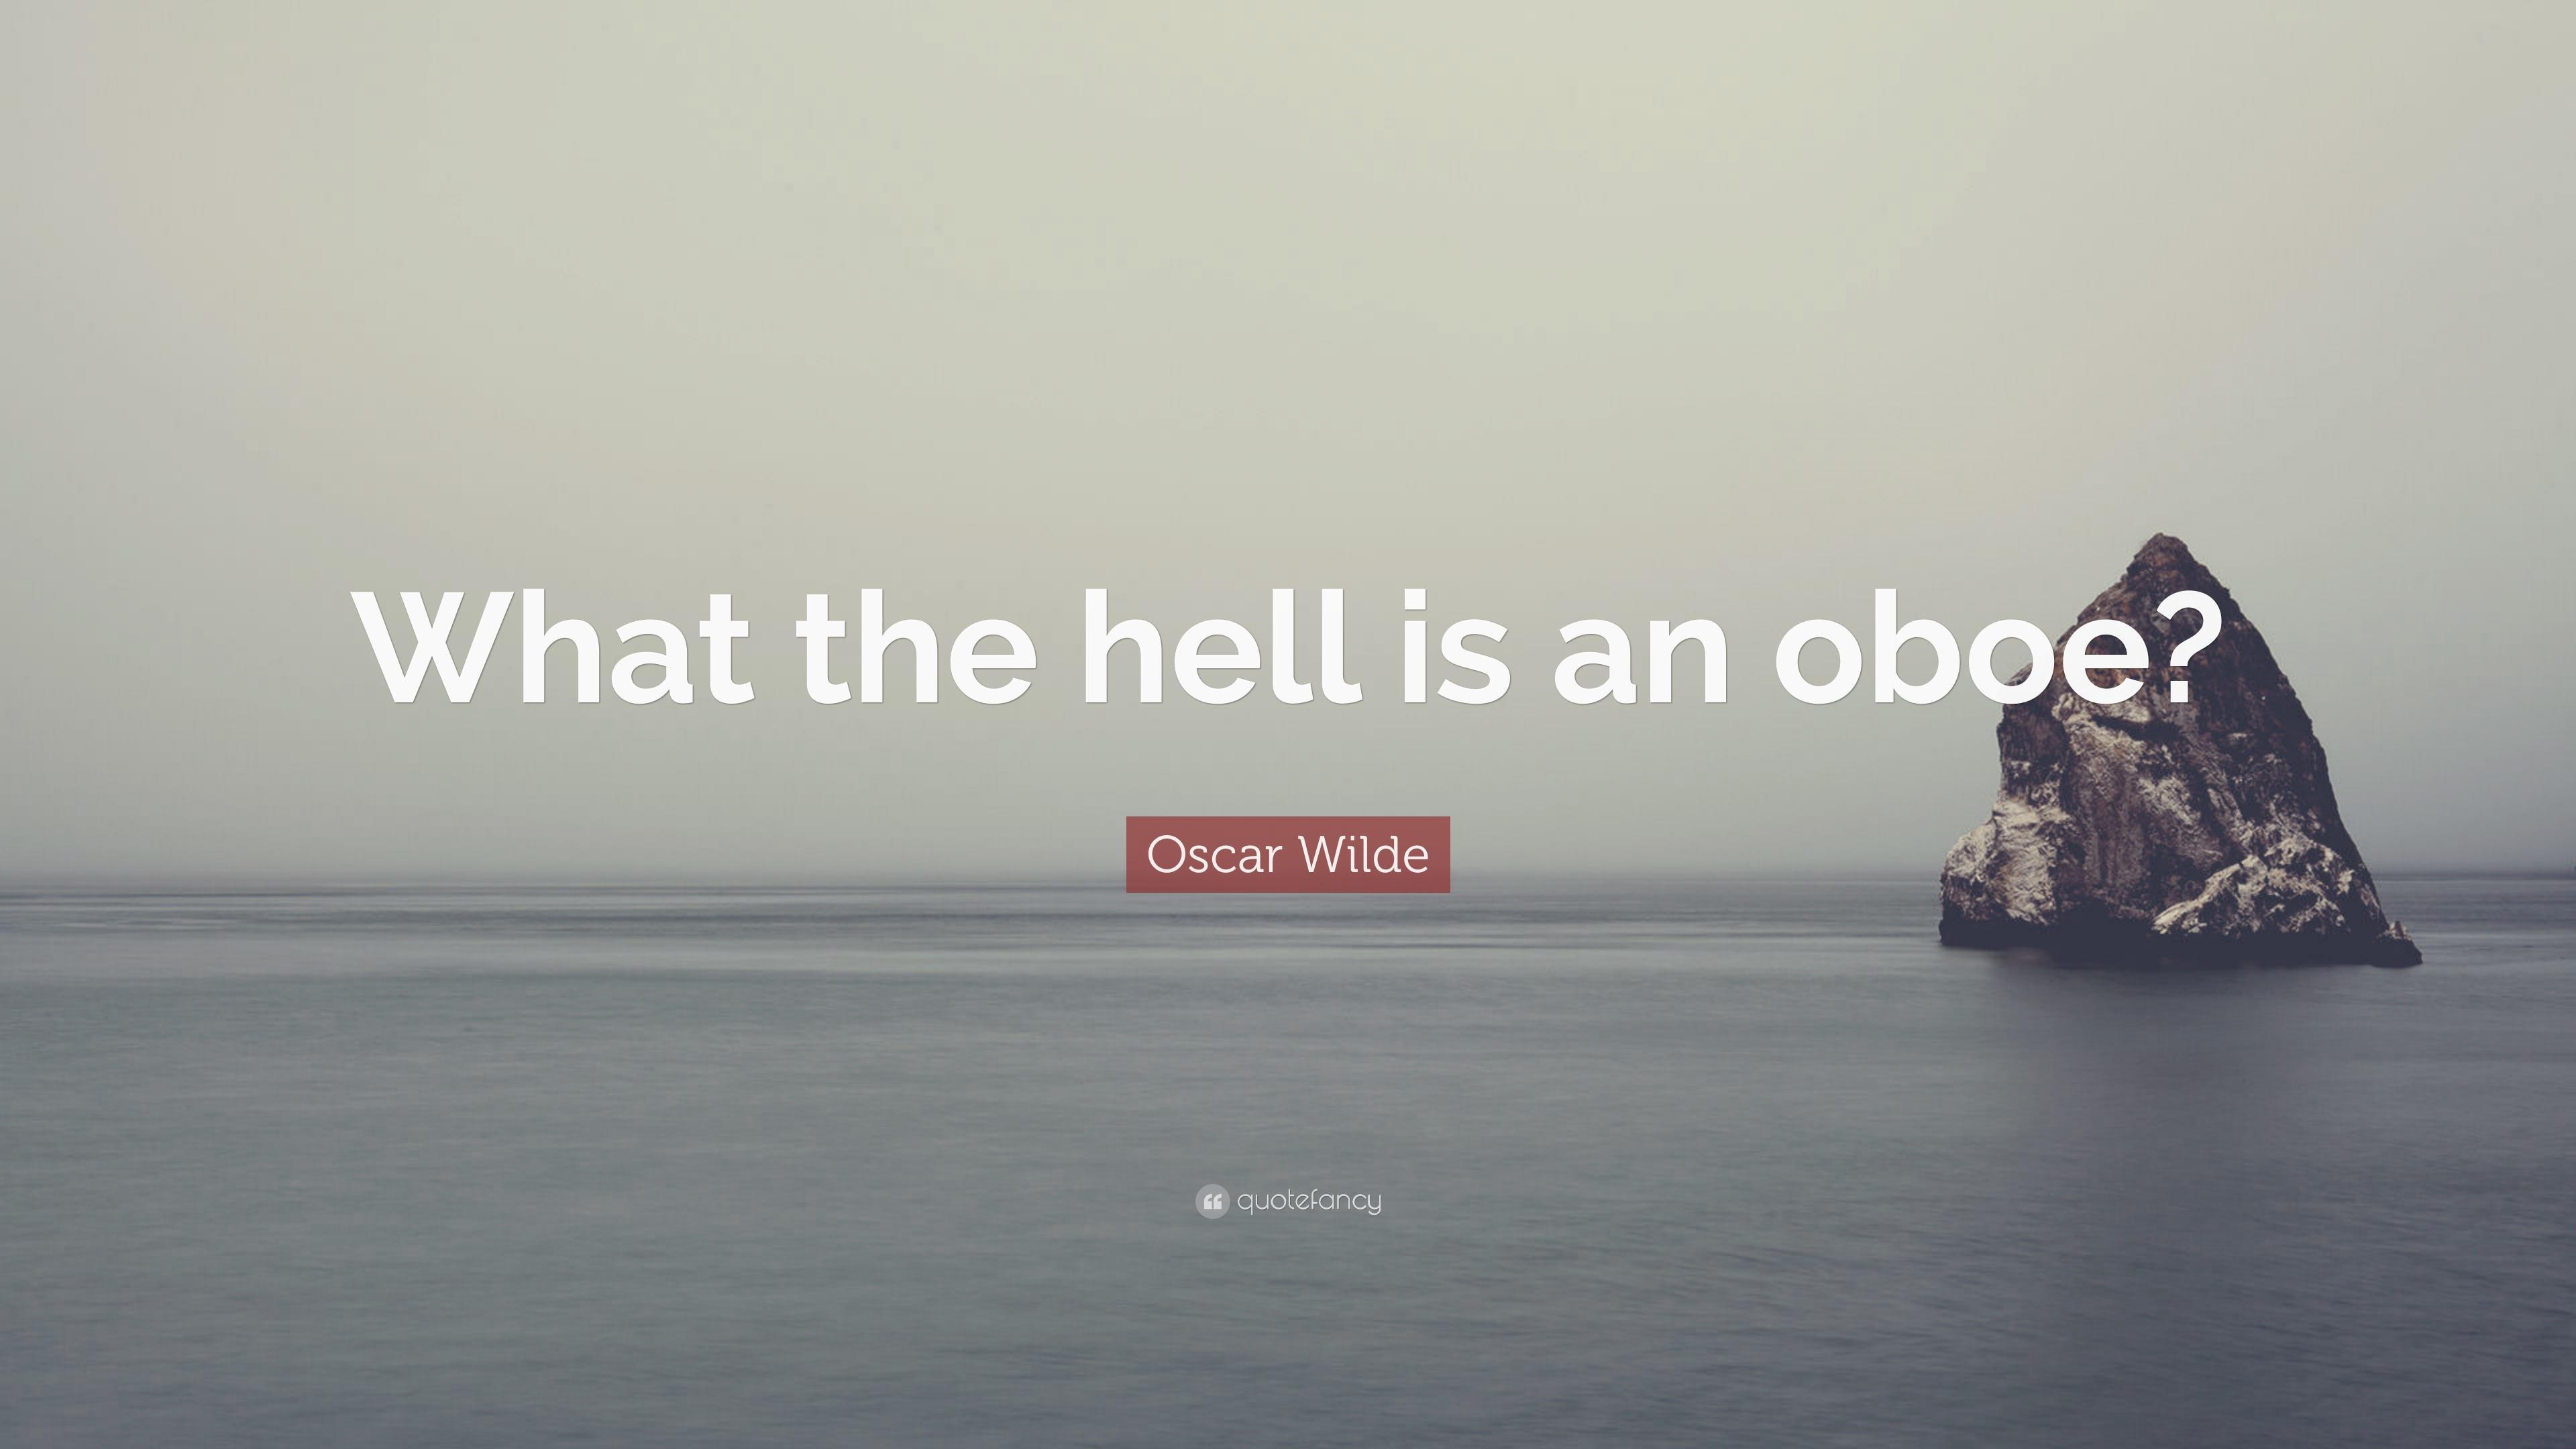 Oscar Wilde Quote: “What the hell is an oboe?” 10 wallpaper